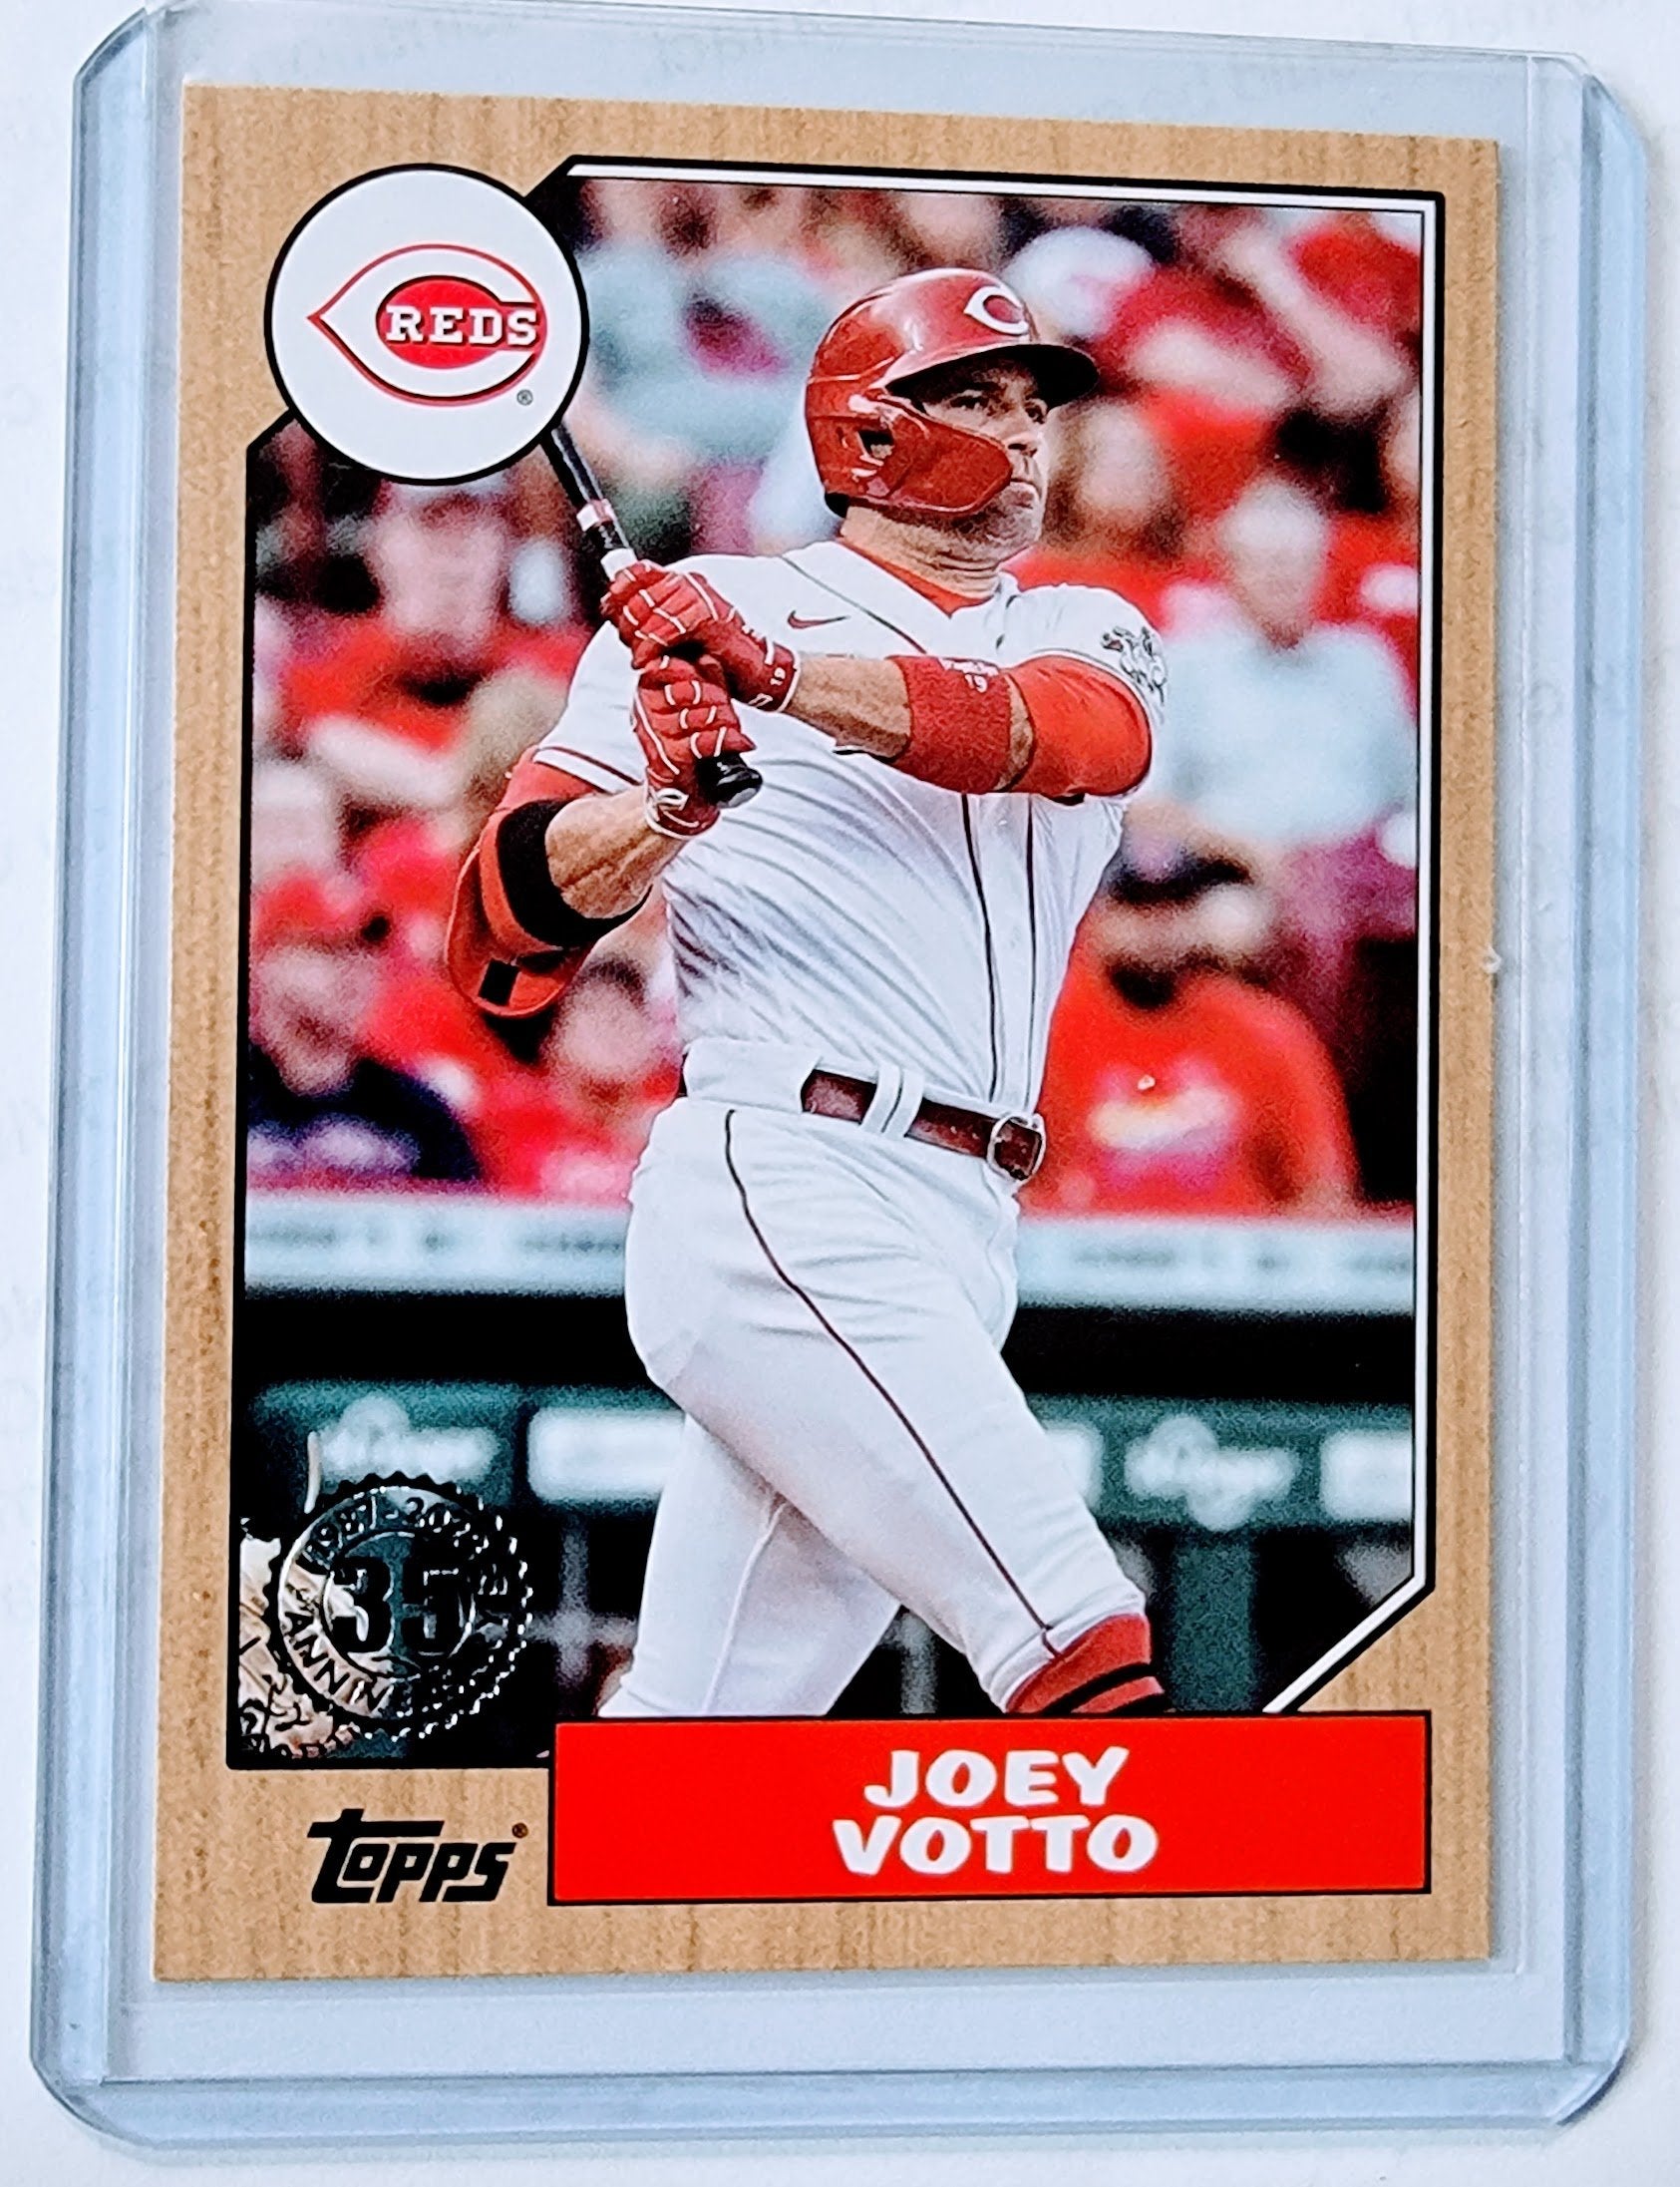 2022 Topps Joey Votto 1987 35th Anniversary Baseball Trading Card GRB1 simple Xclusive Collectibles   